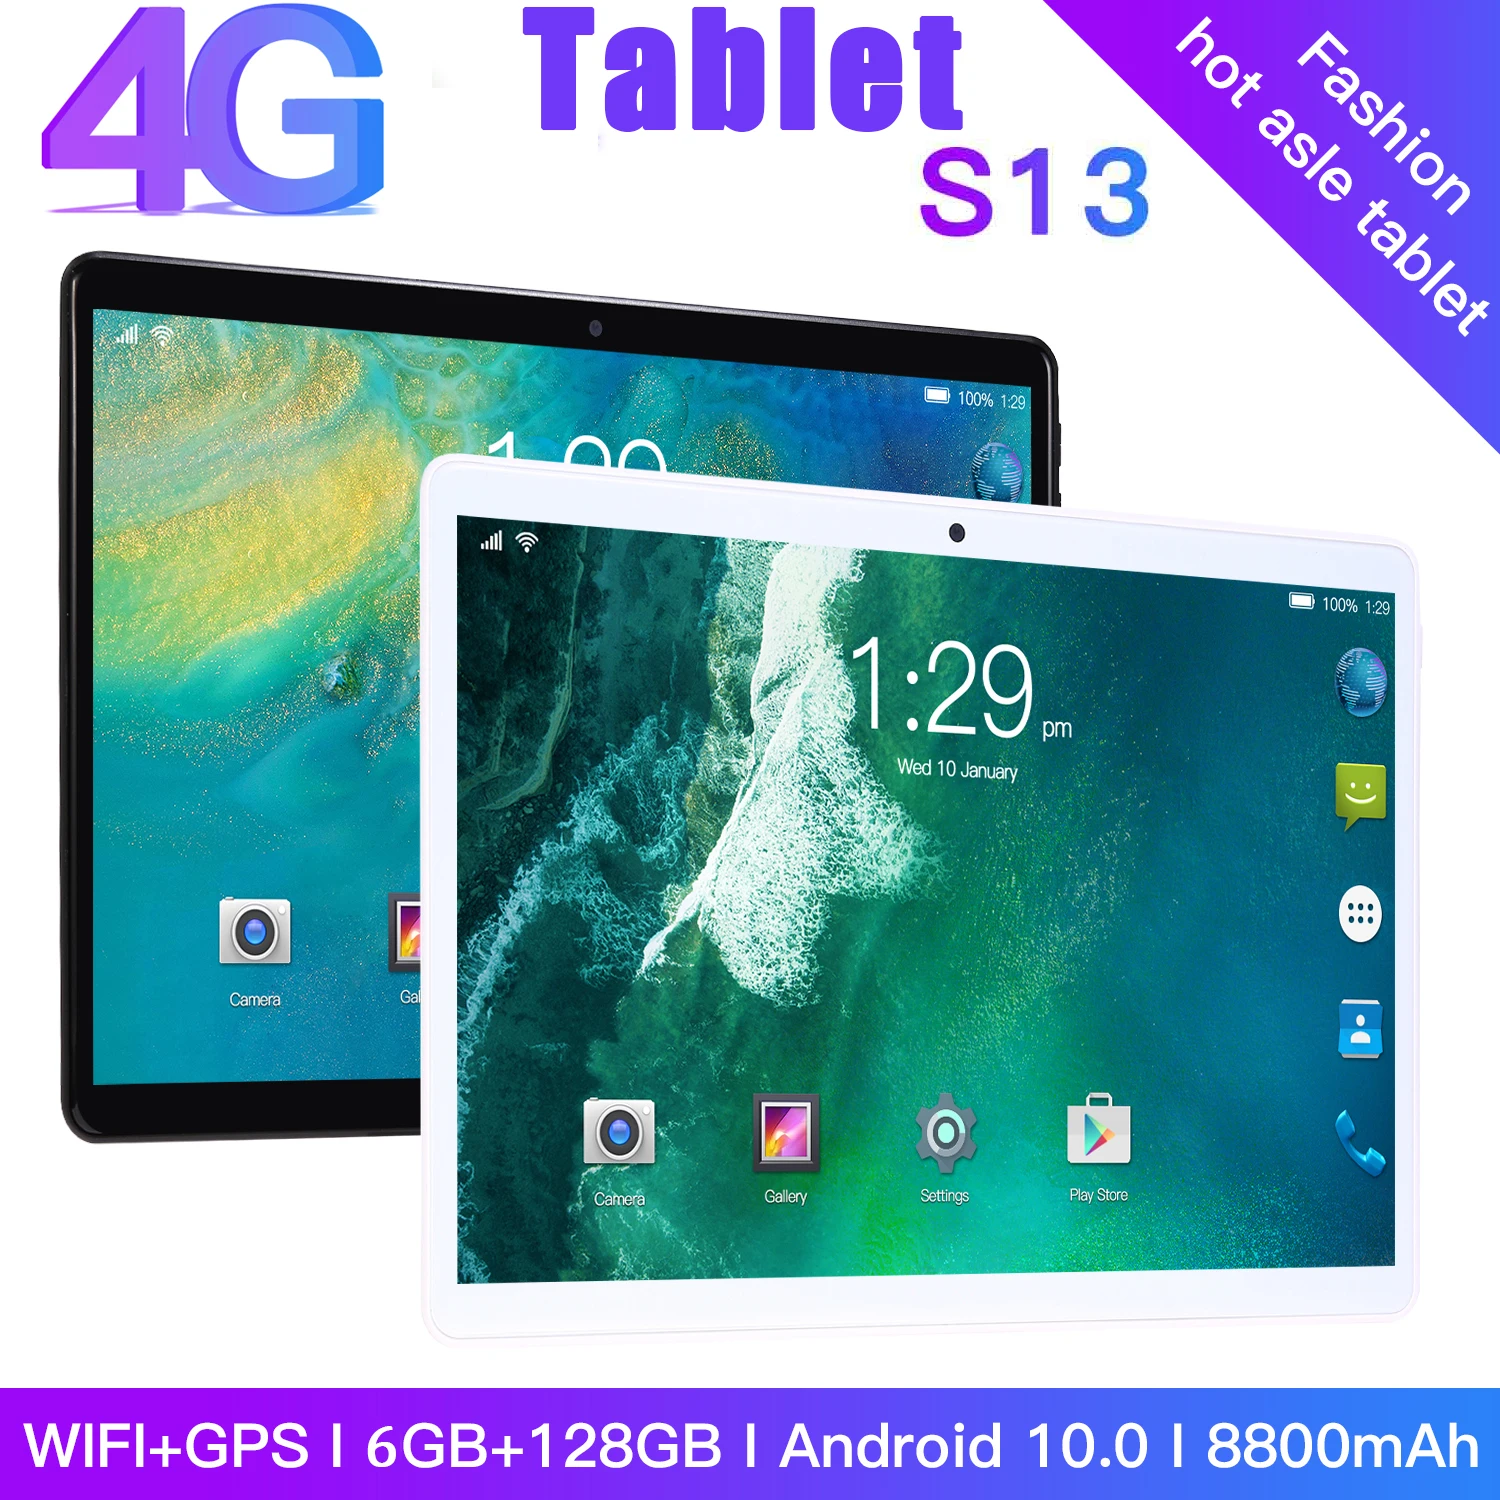 Tablet PC Android 10 S13 Tablet PC Dual SIM 8800mAh 6GB 128GB 10.1 Inch Google WIFI Netbook Cheap Tablet GPS LTE Hot Sales Pad